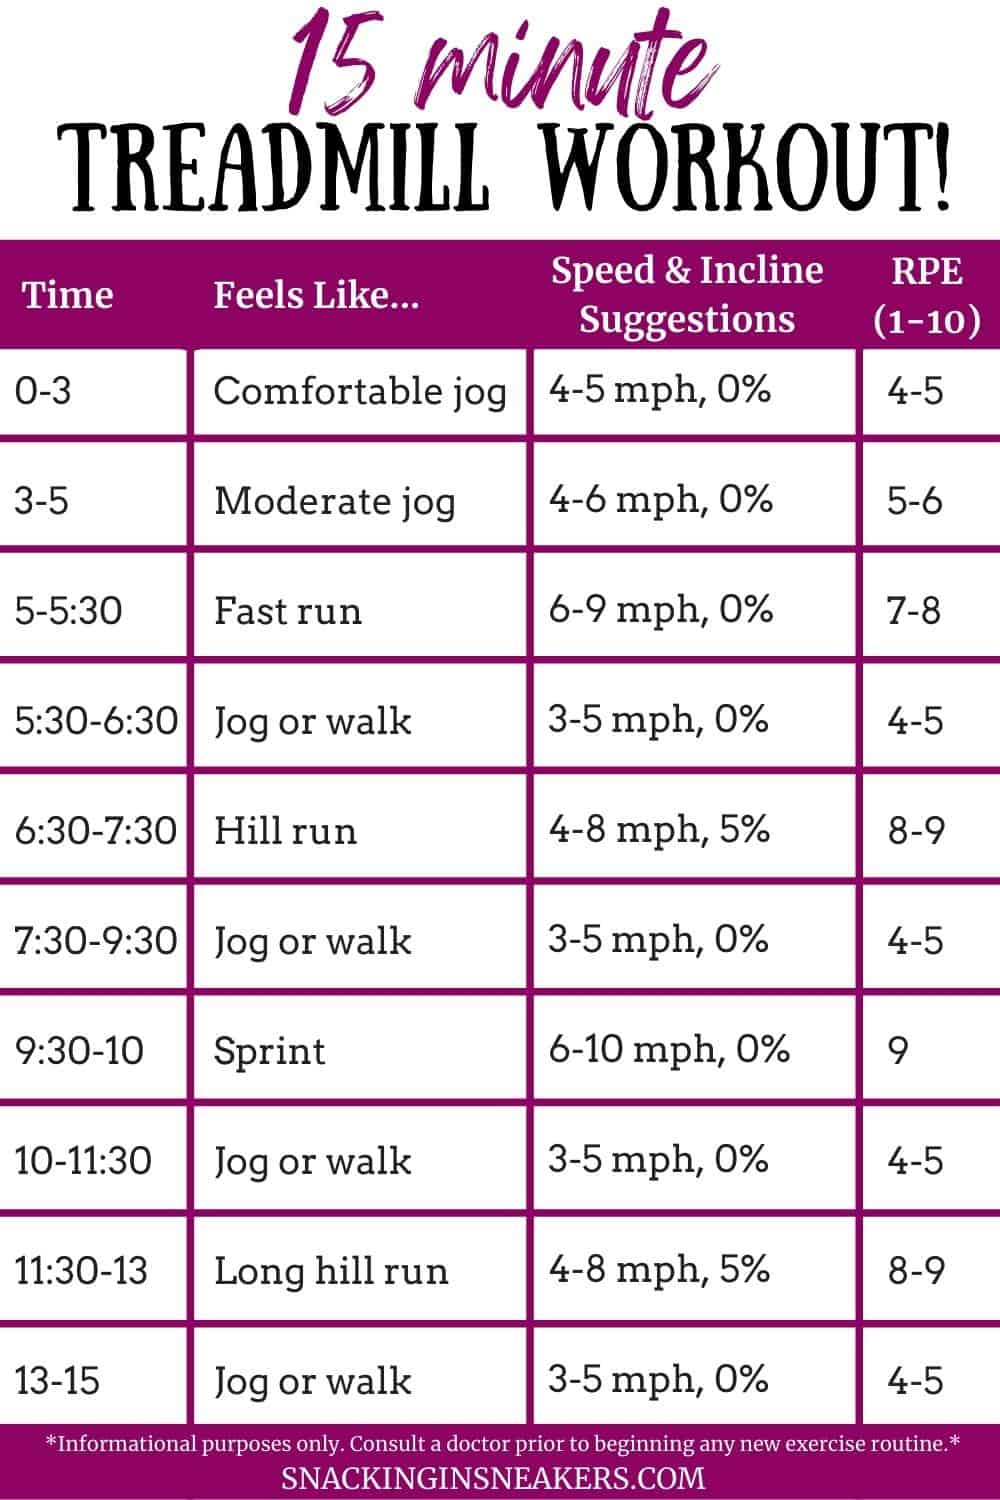 How To Do Hiit On Treadmill